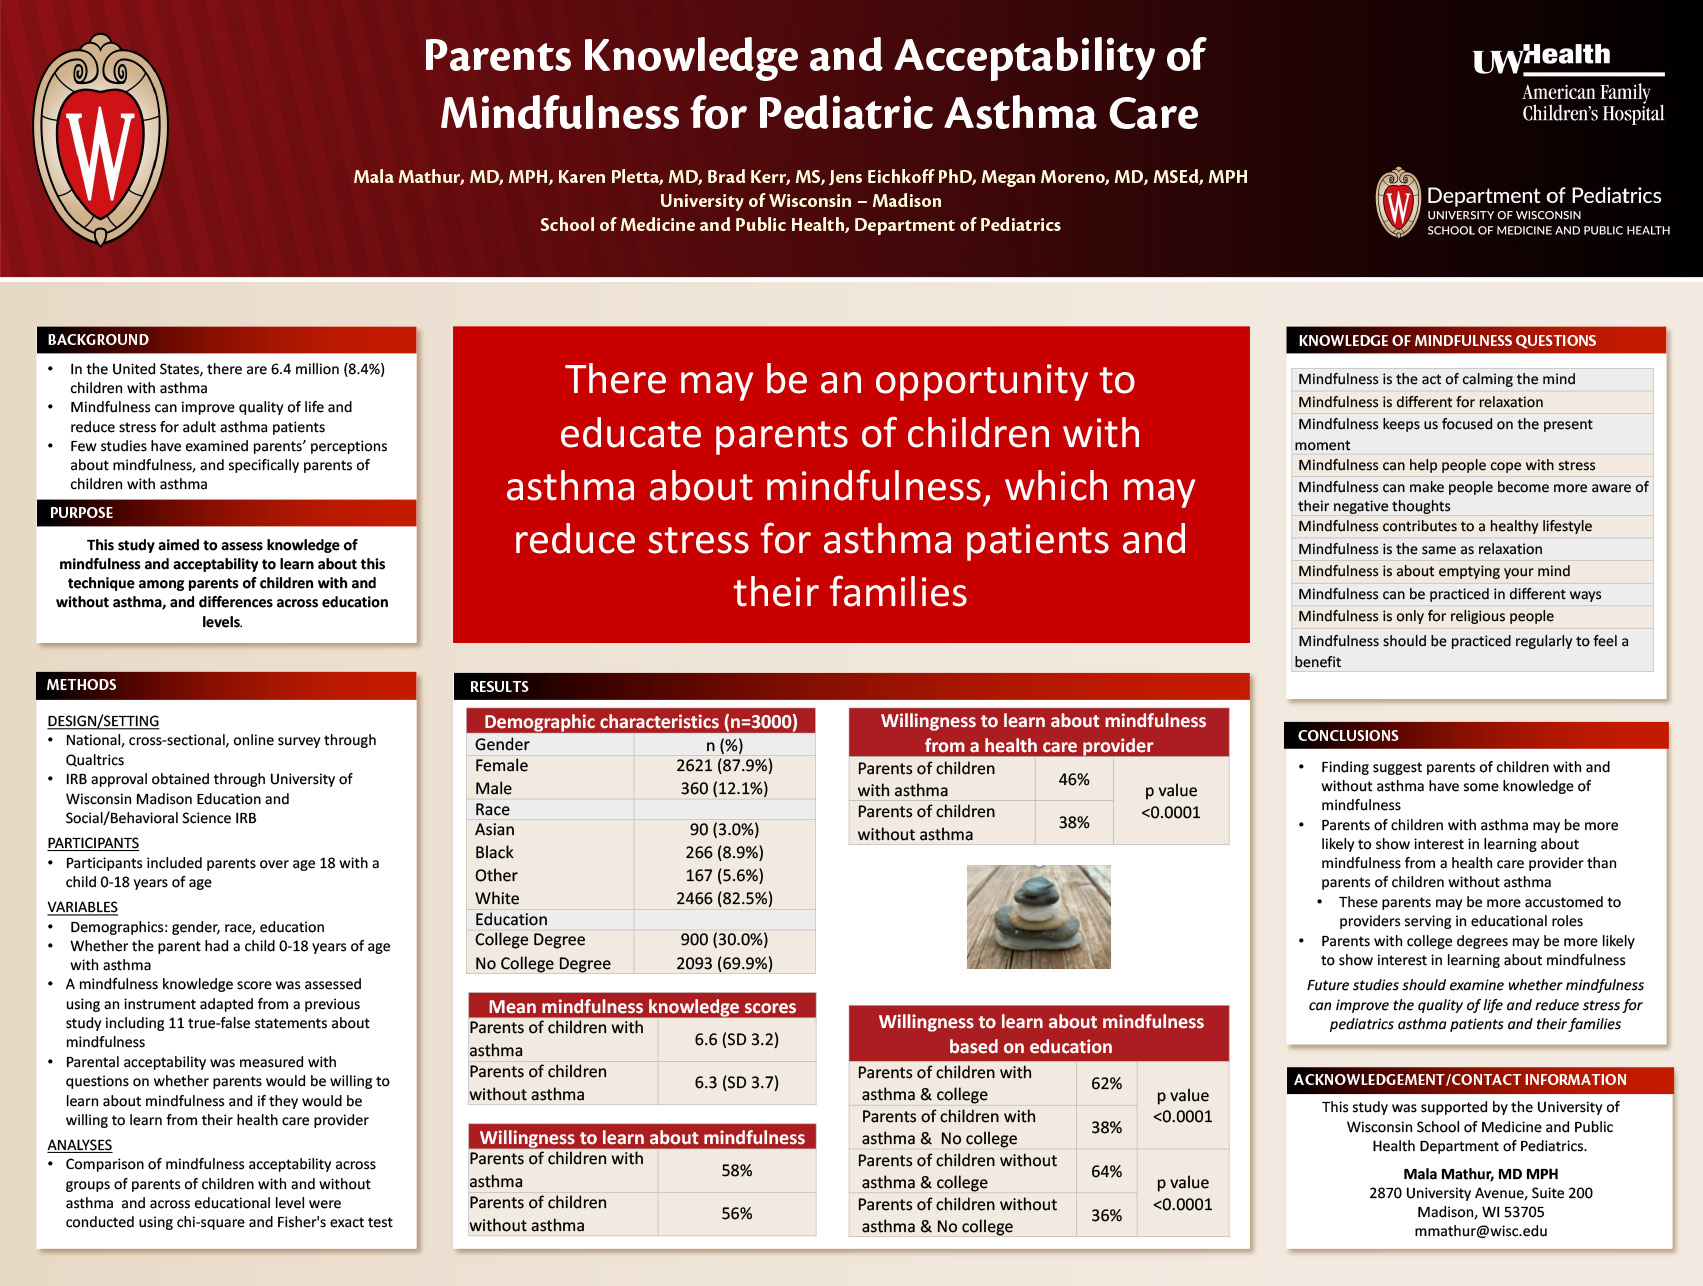 Parents’ Knowledge and Acceptability of Mindfulness for Pediatric Asthma Care poster image